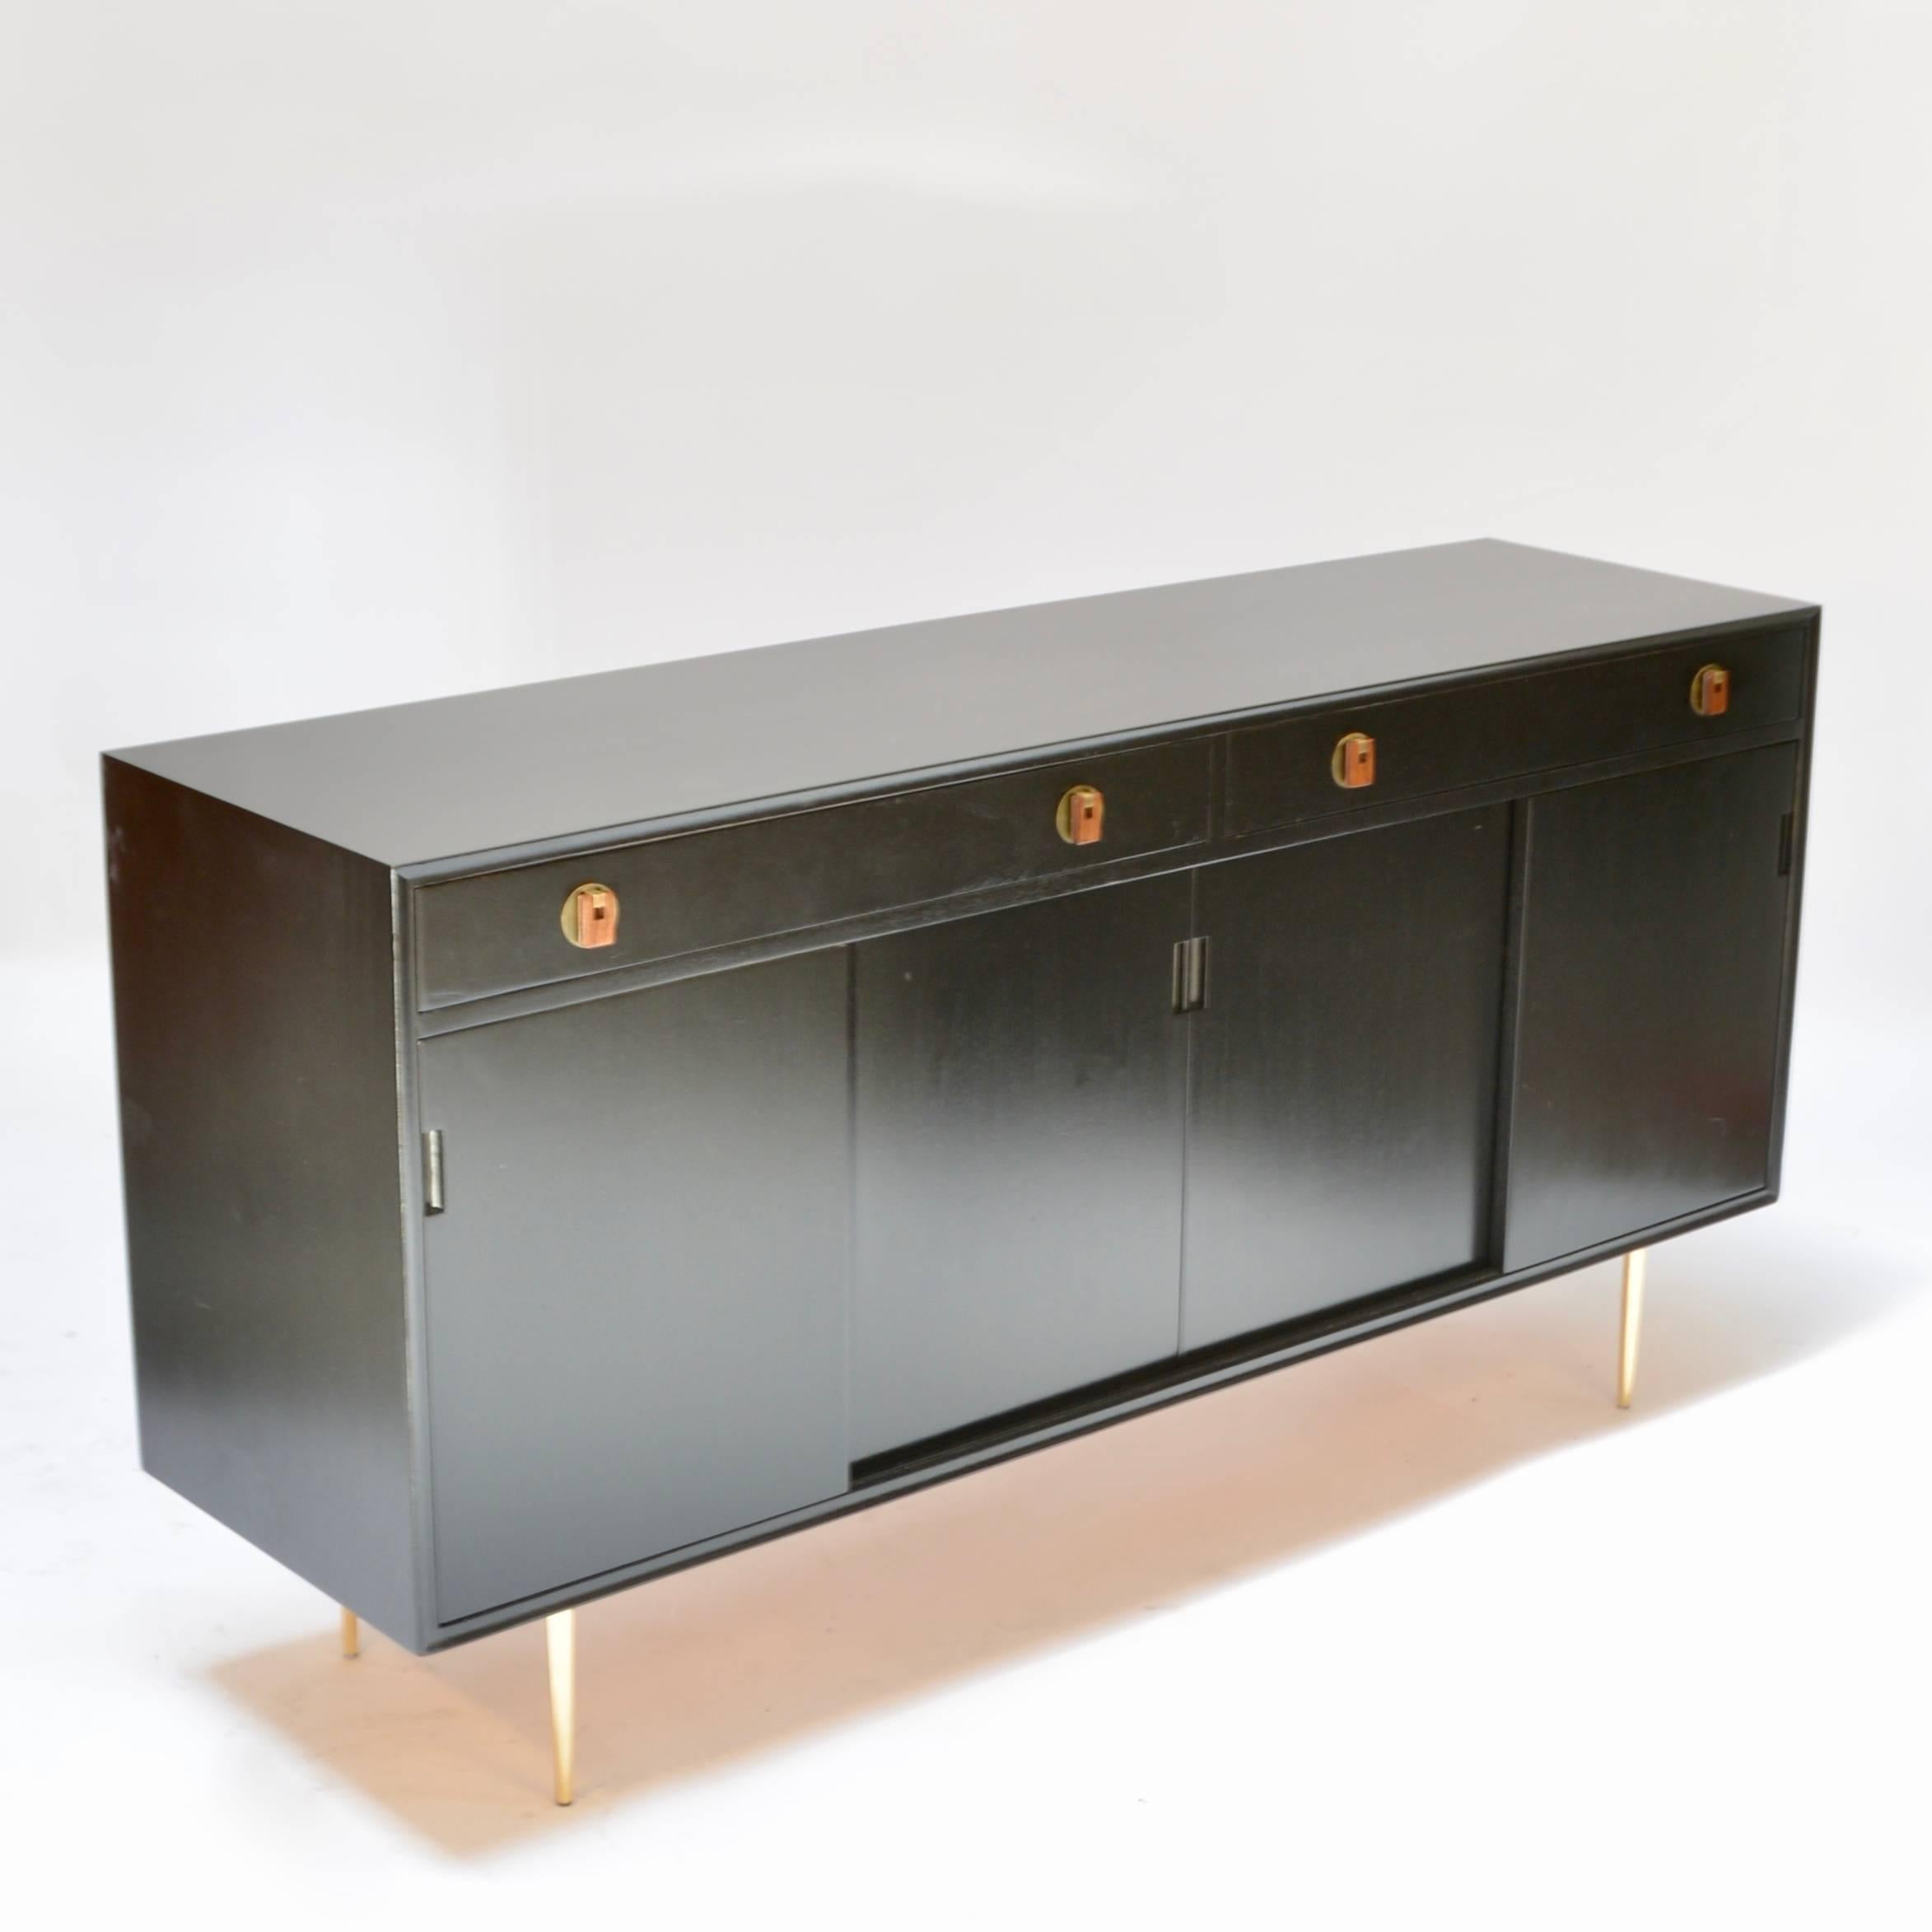 This is a beautiful ebonized mahogany credenza by Edward Wormley for Dunbar. This piece has been professionally restored and finished.